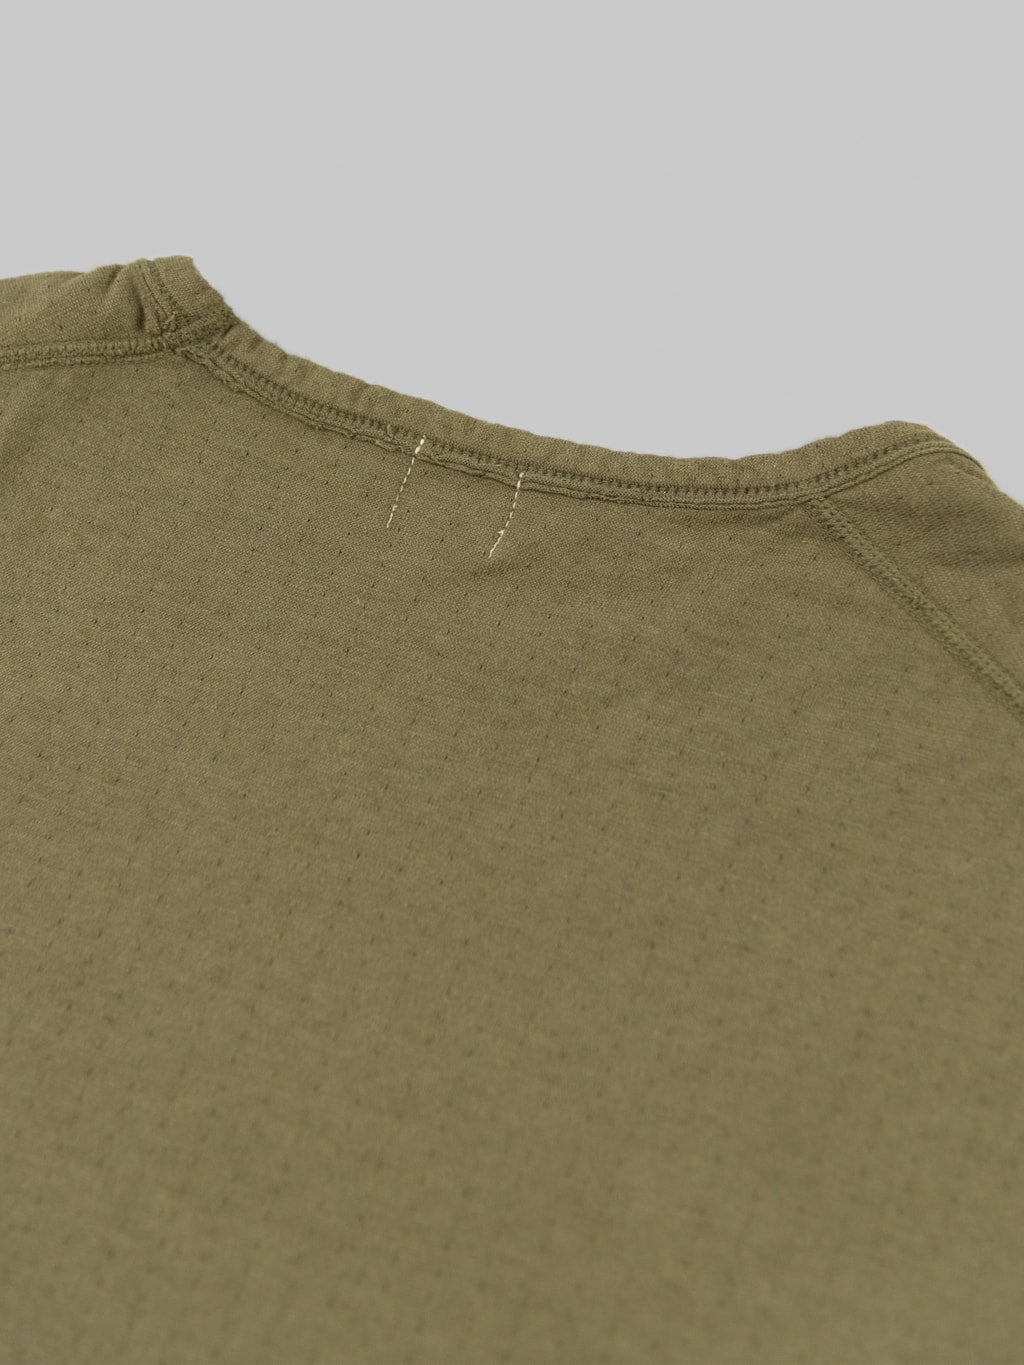 Loop and Weft Dual Layered Knit raw edge pocket TShirt olive neck